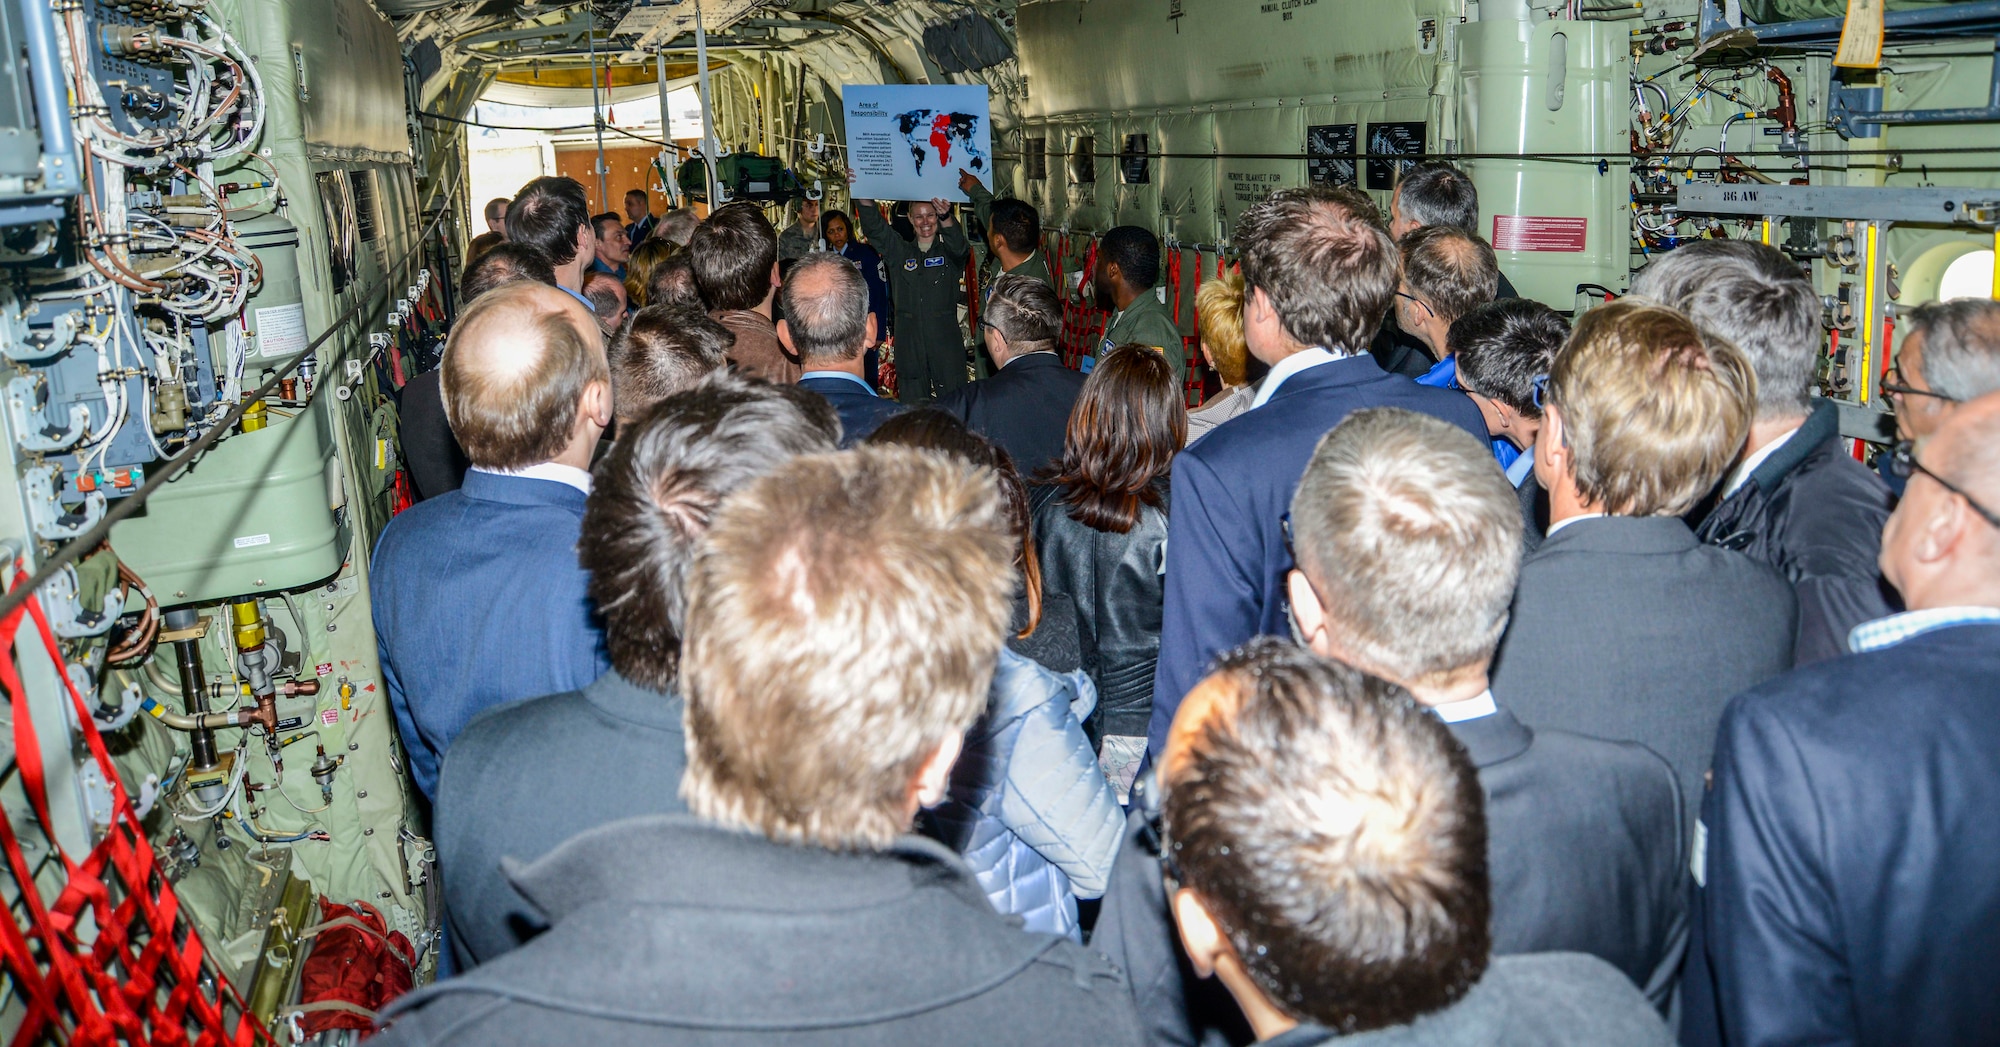 Technical Sgt. Pablo Vasquez, 86th Aeromedical Evacuation Squadron aeromedical evacuation technician, briefs civilian medical providers on the 86th AES’s area of responsibility during a tour on Ramstein Air Base, Germany, April 27, 2017. When a military member is unable to receive the medical care they need at a military facility, local medical providers often take charge of their care. (U.S. Air Force photo/Staff Sgt. Timothy Moore)